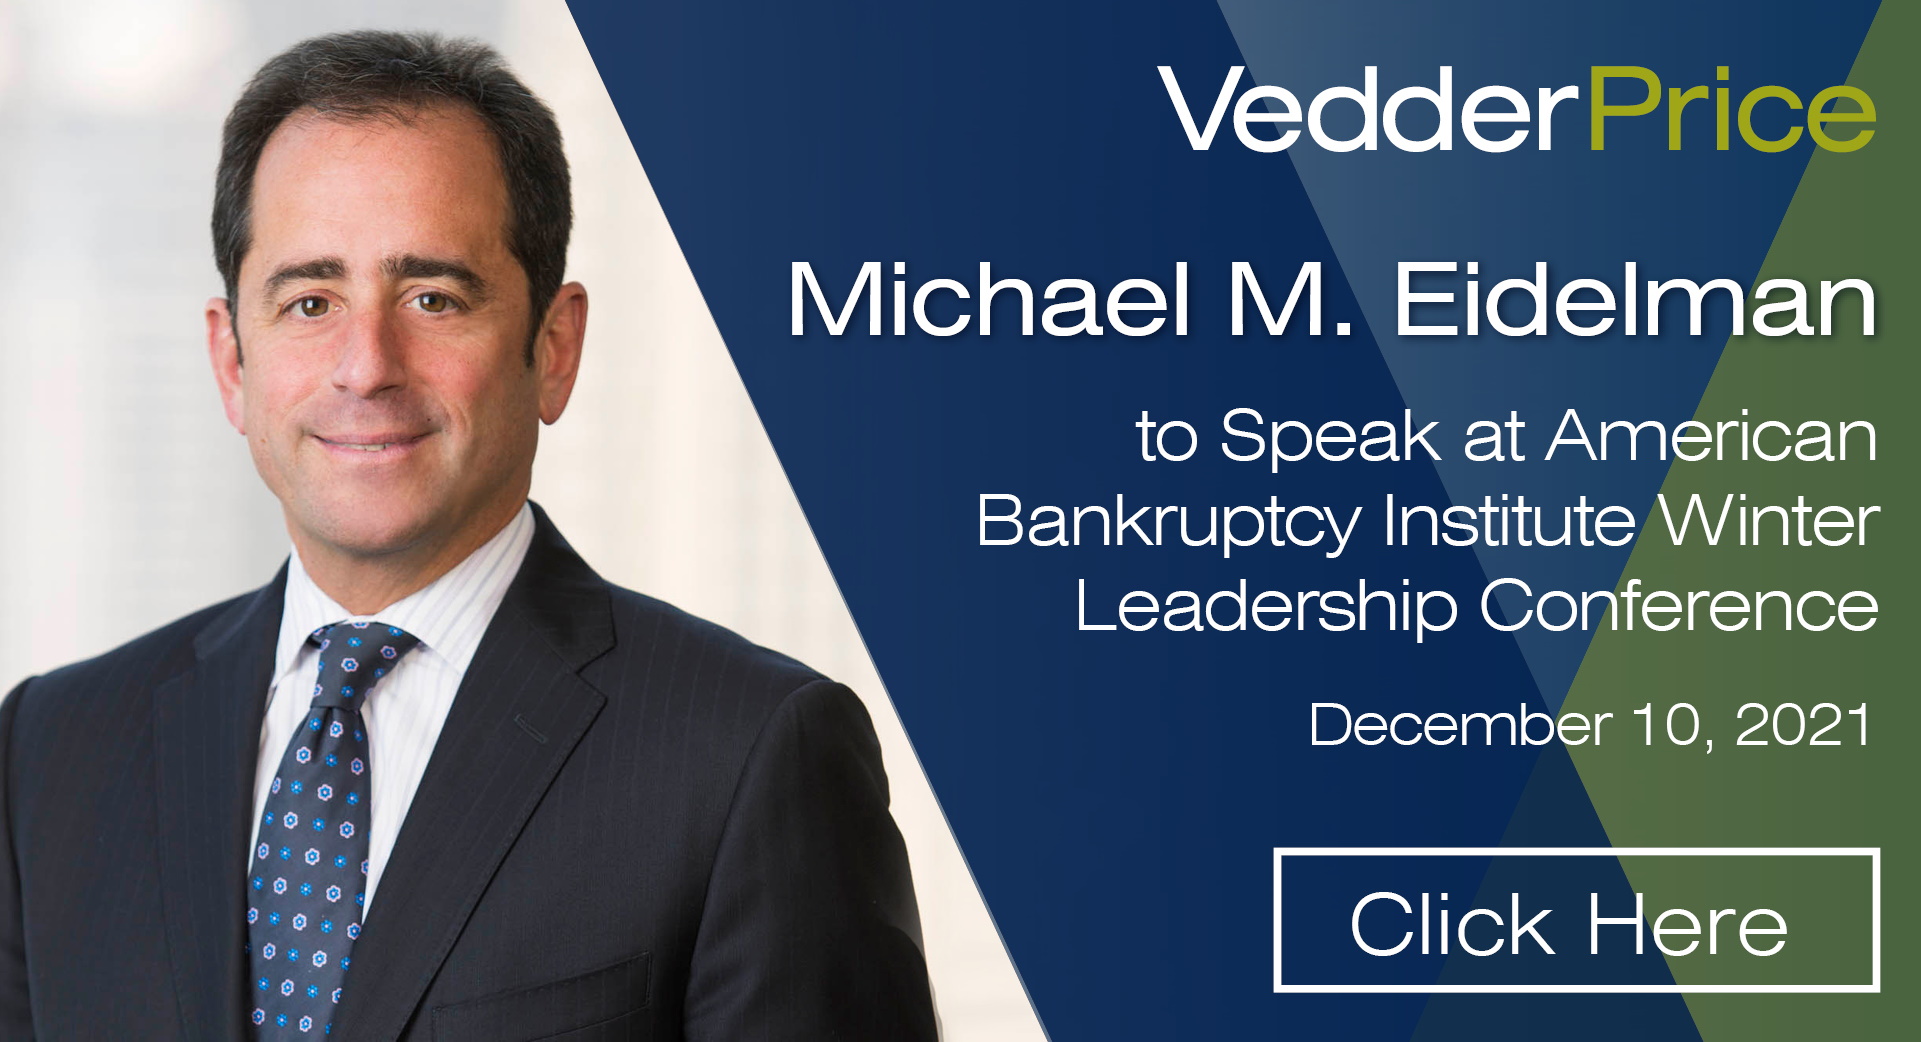 Michael Eidelman to Speak on Real Estate Restructuring Issues at ABI